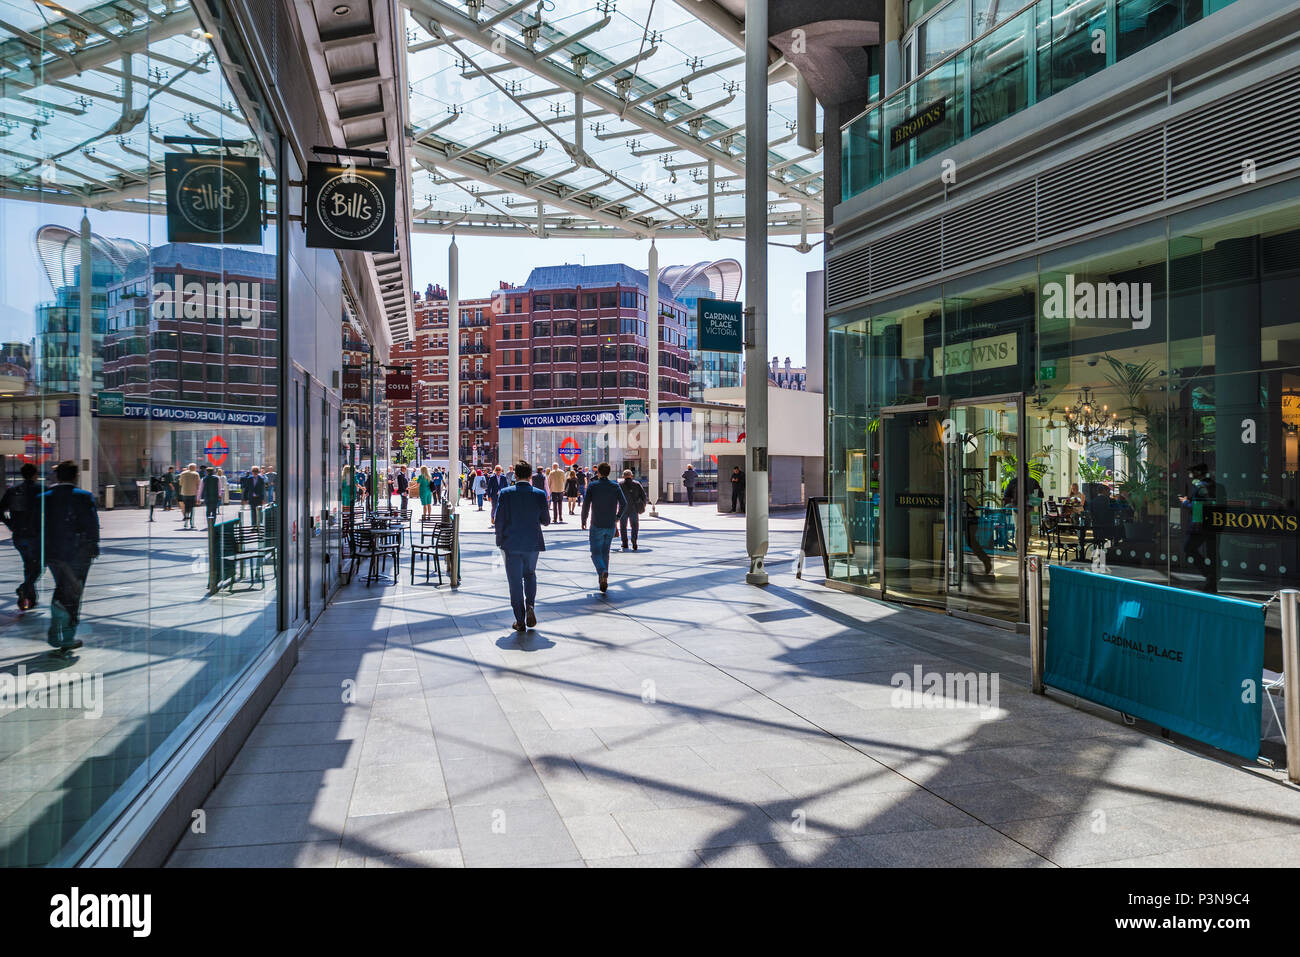 LONDON, UNITED KINGDOM - MAY 17: This is Cardinal Place, a retail and office development located in the downtown area of Wesminster near Victoria stat Stock Photo